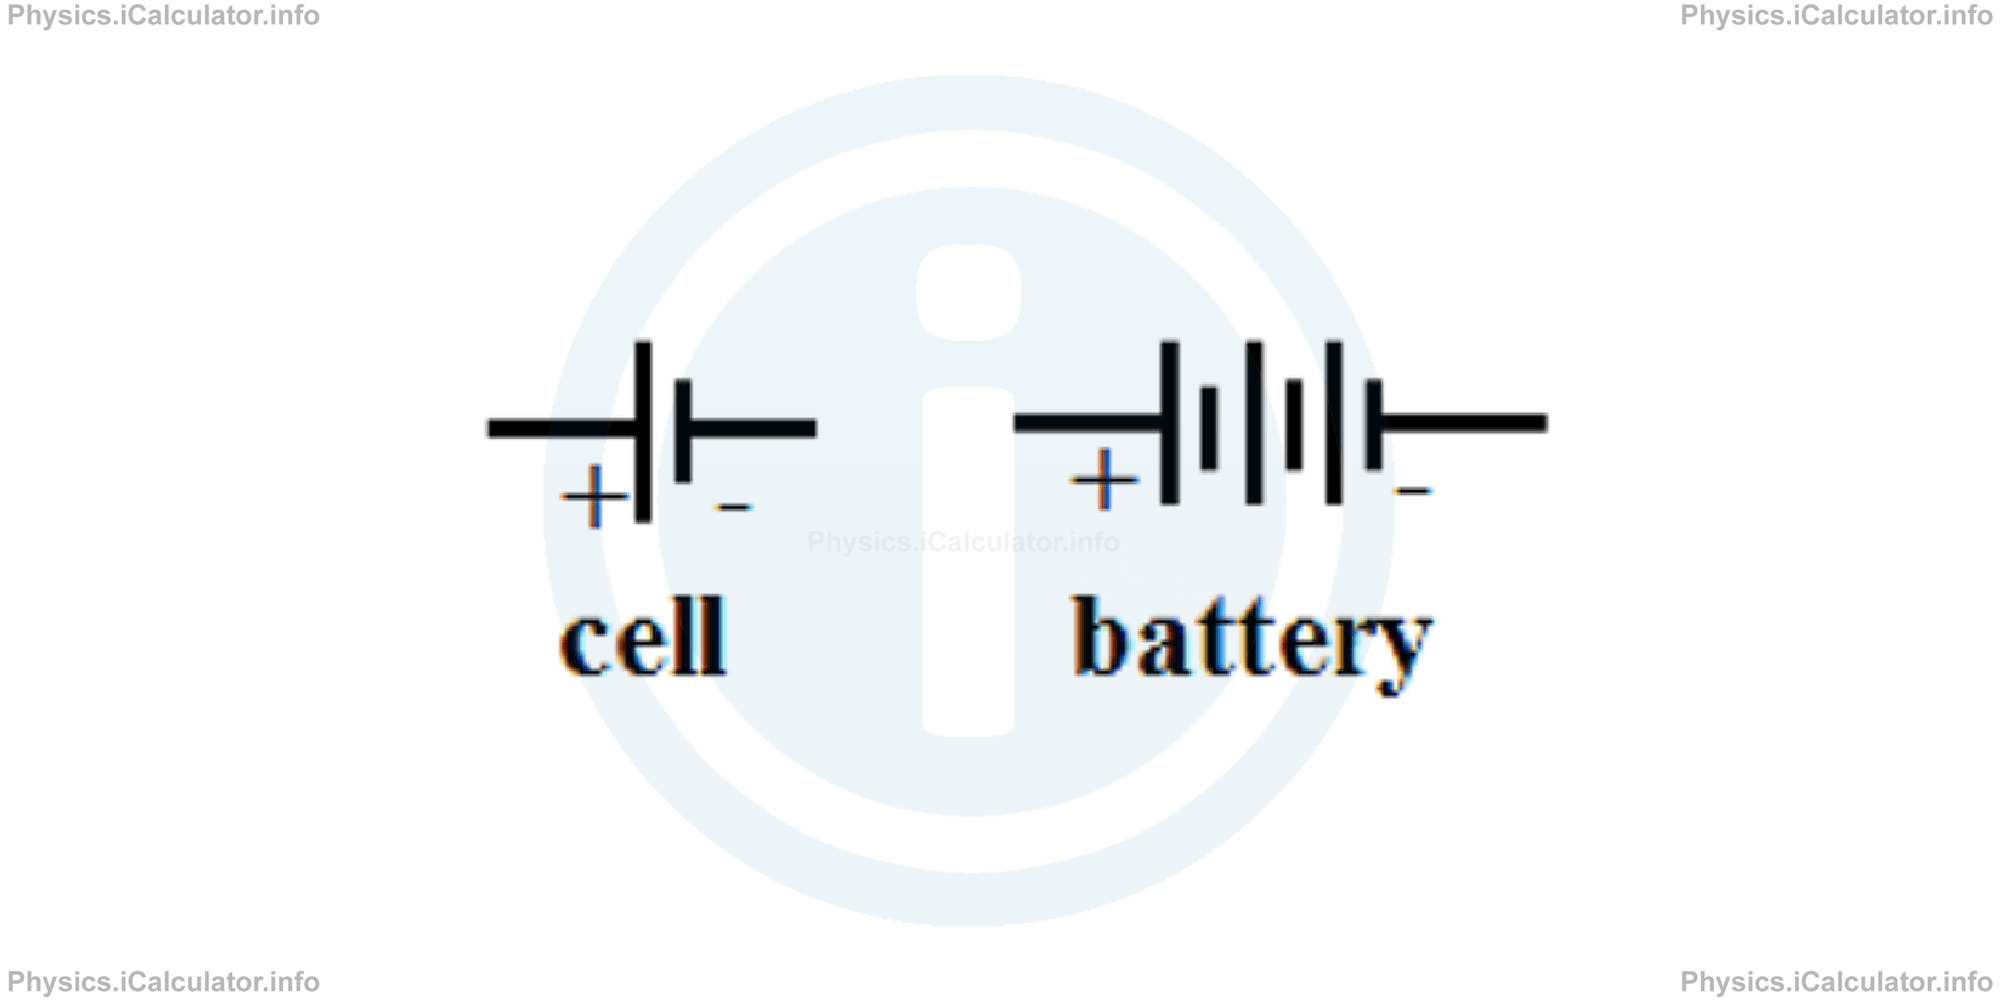 Physics Tutorials: This image provides visual information for the physics tutorial Electric Potential Difference (Voltage). Ohm's Law 